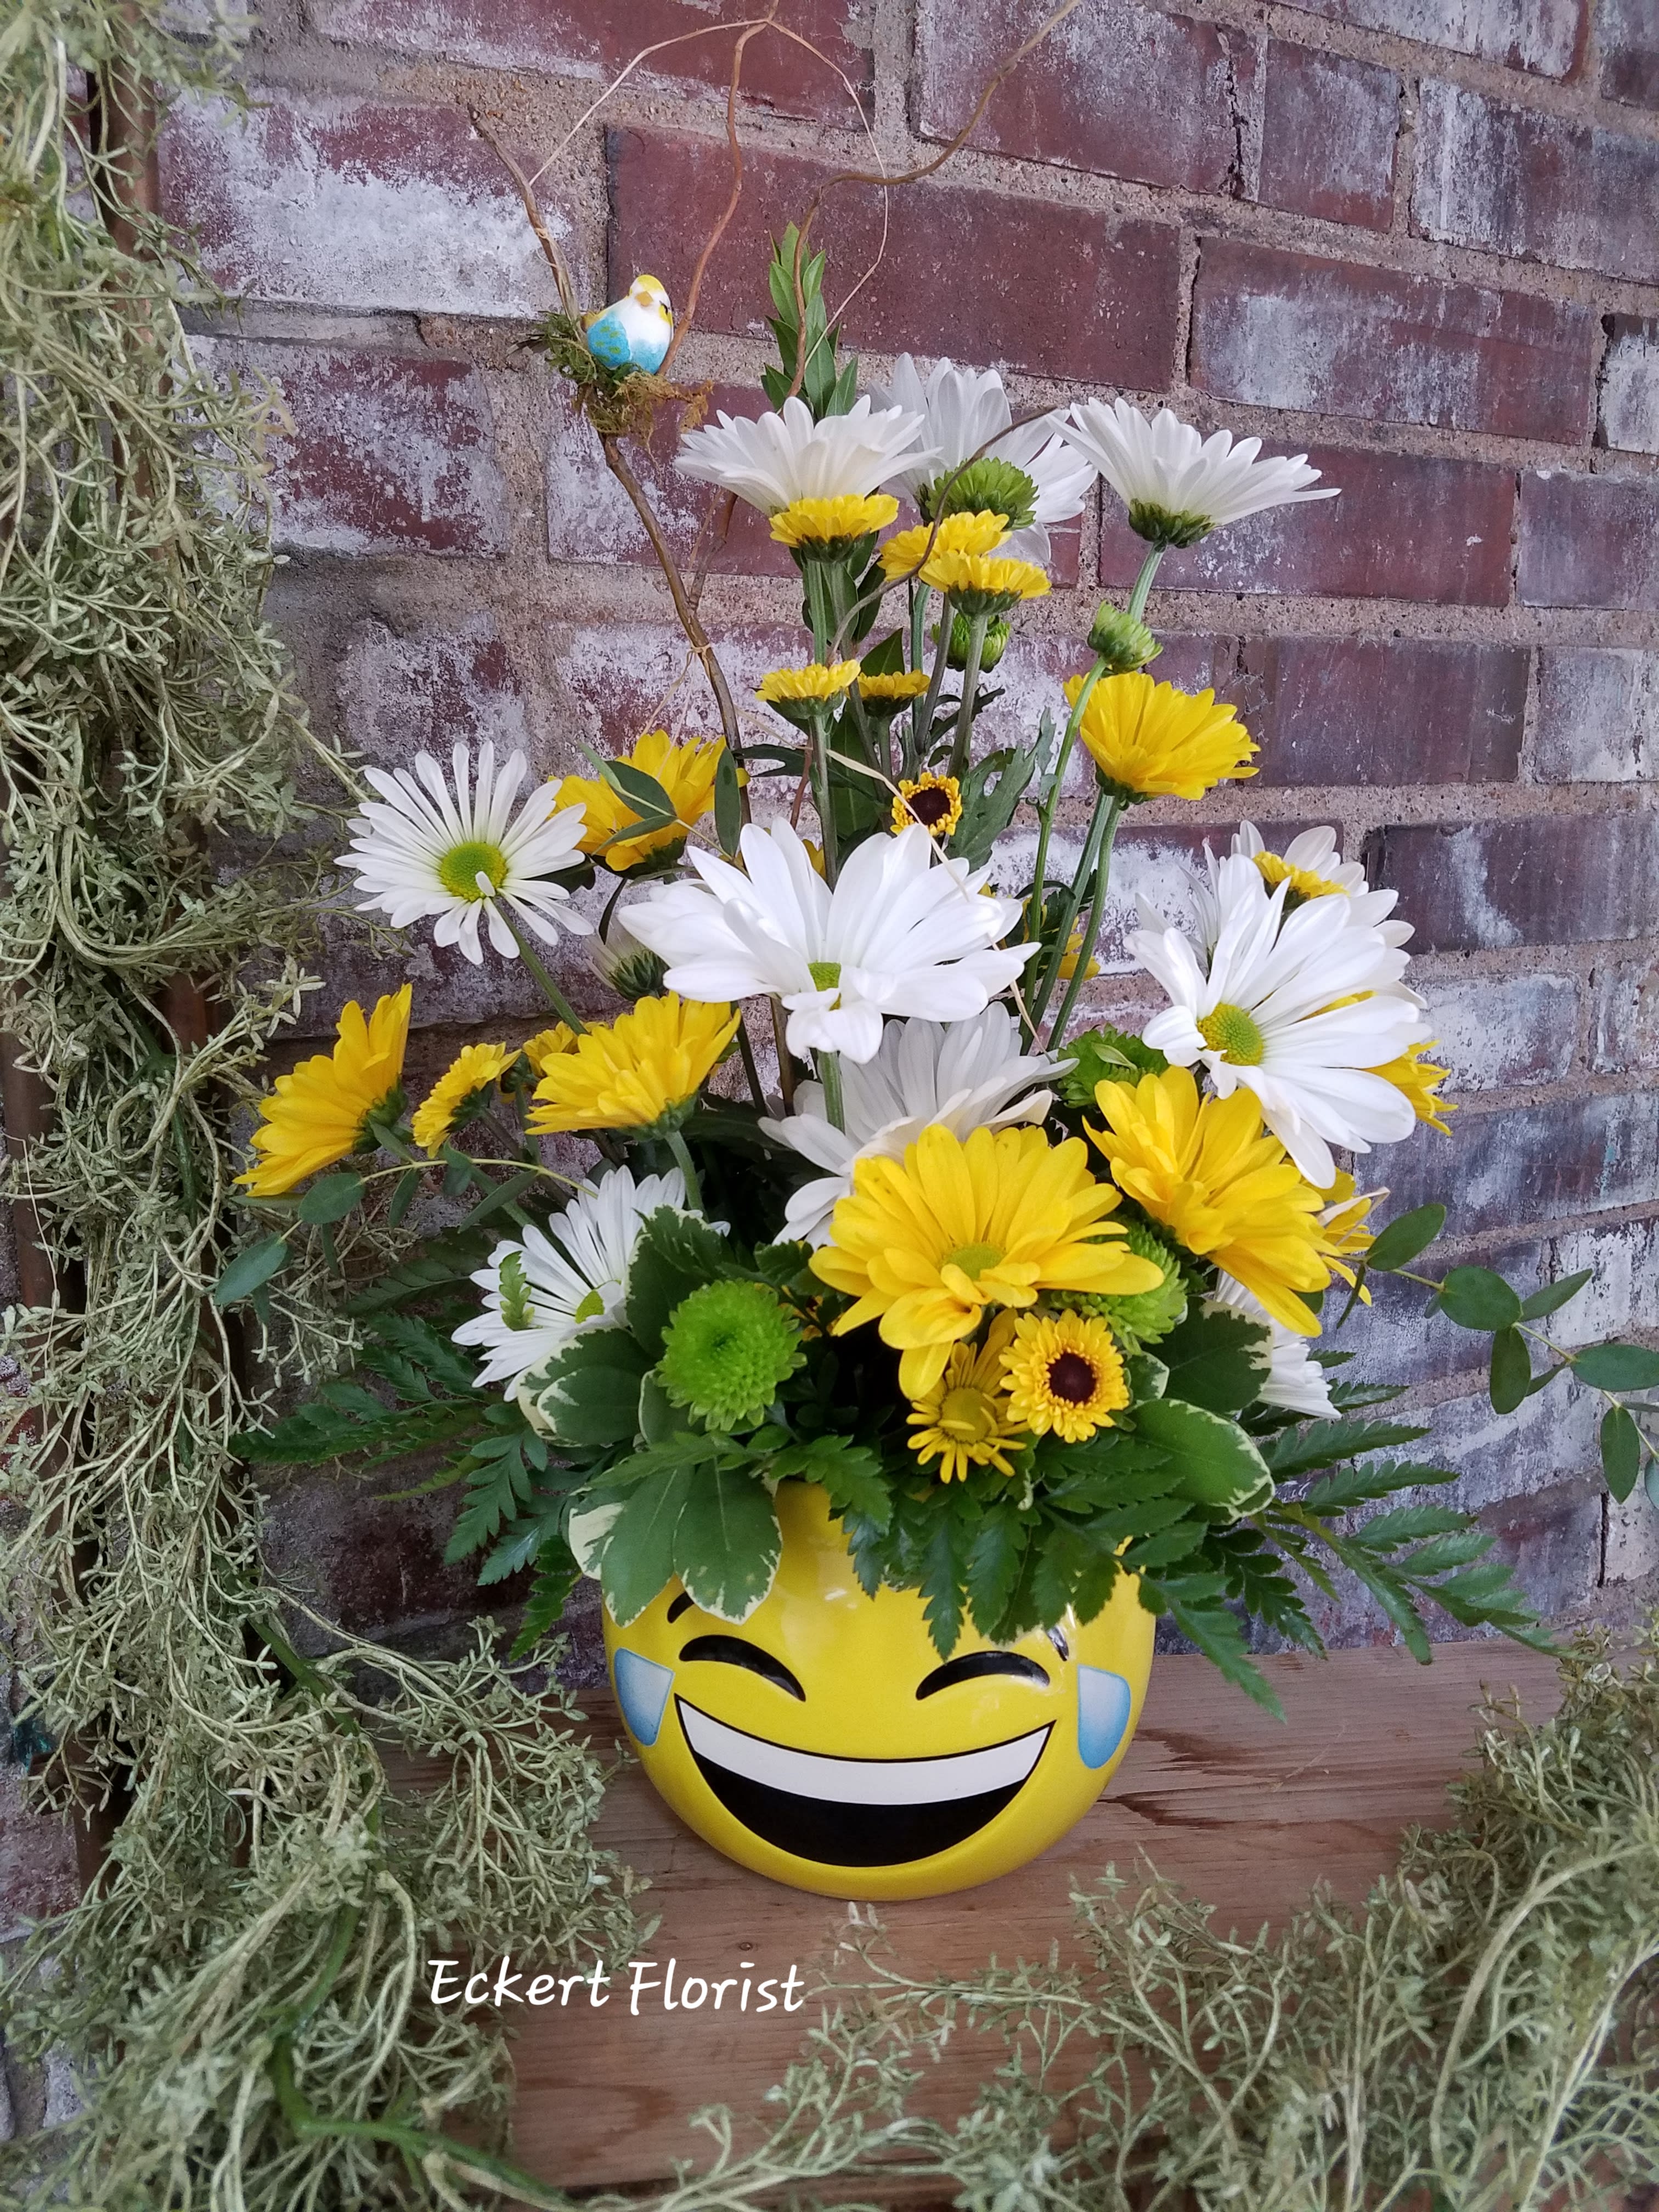 Eckert Florist's LOL Emoji Bouquet *LOCAL DELIVERY ONLY - Send a &quot;Laugh&quot; with our LOL Emoji Bouquet! Designed in a ceramic container, this arrangement filled with daisies will sure to lift the spirits of its recipient. Container size approx. 4.5&quot; H X 6&quot; W